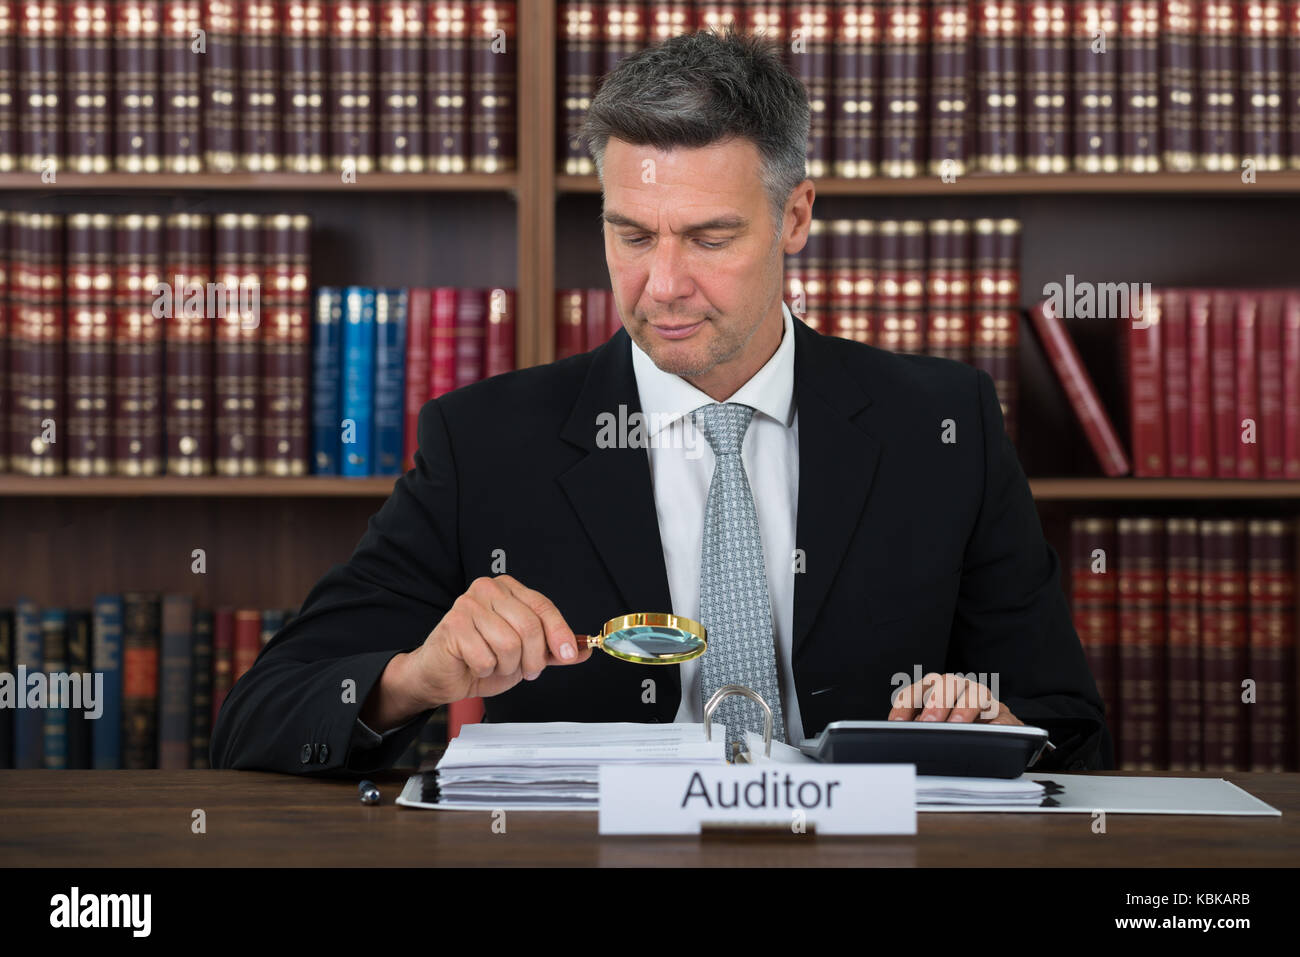 Mature male auditor scrutinizing financial documents at table in office Stock Photo